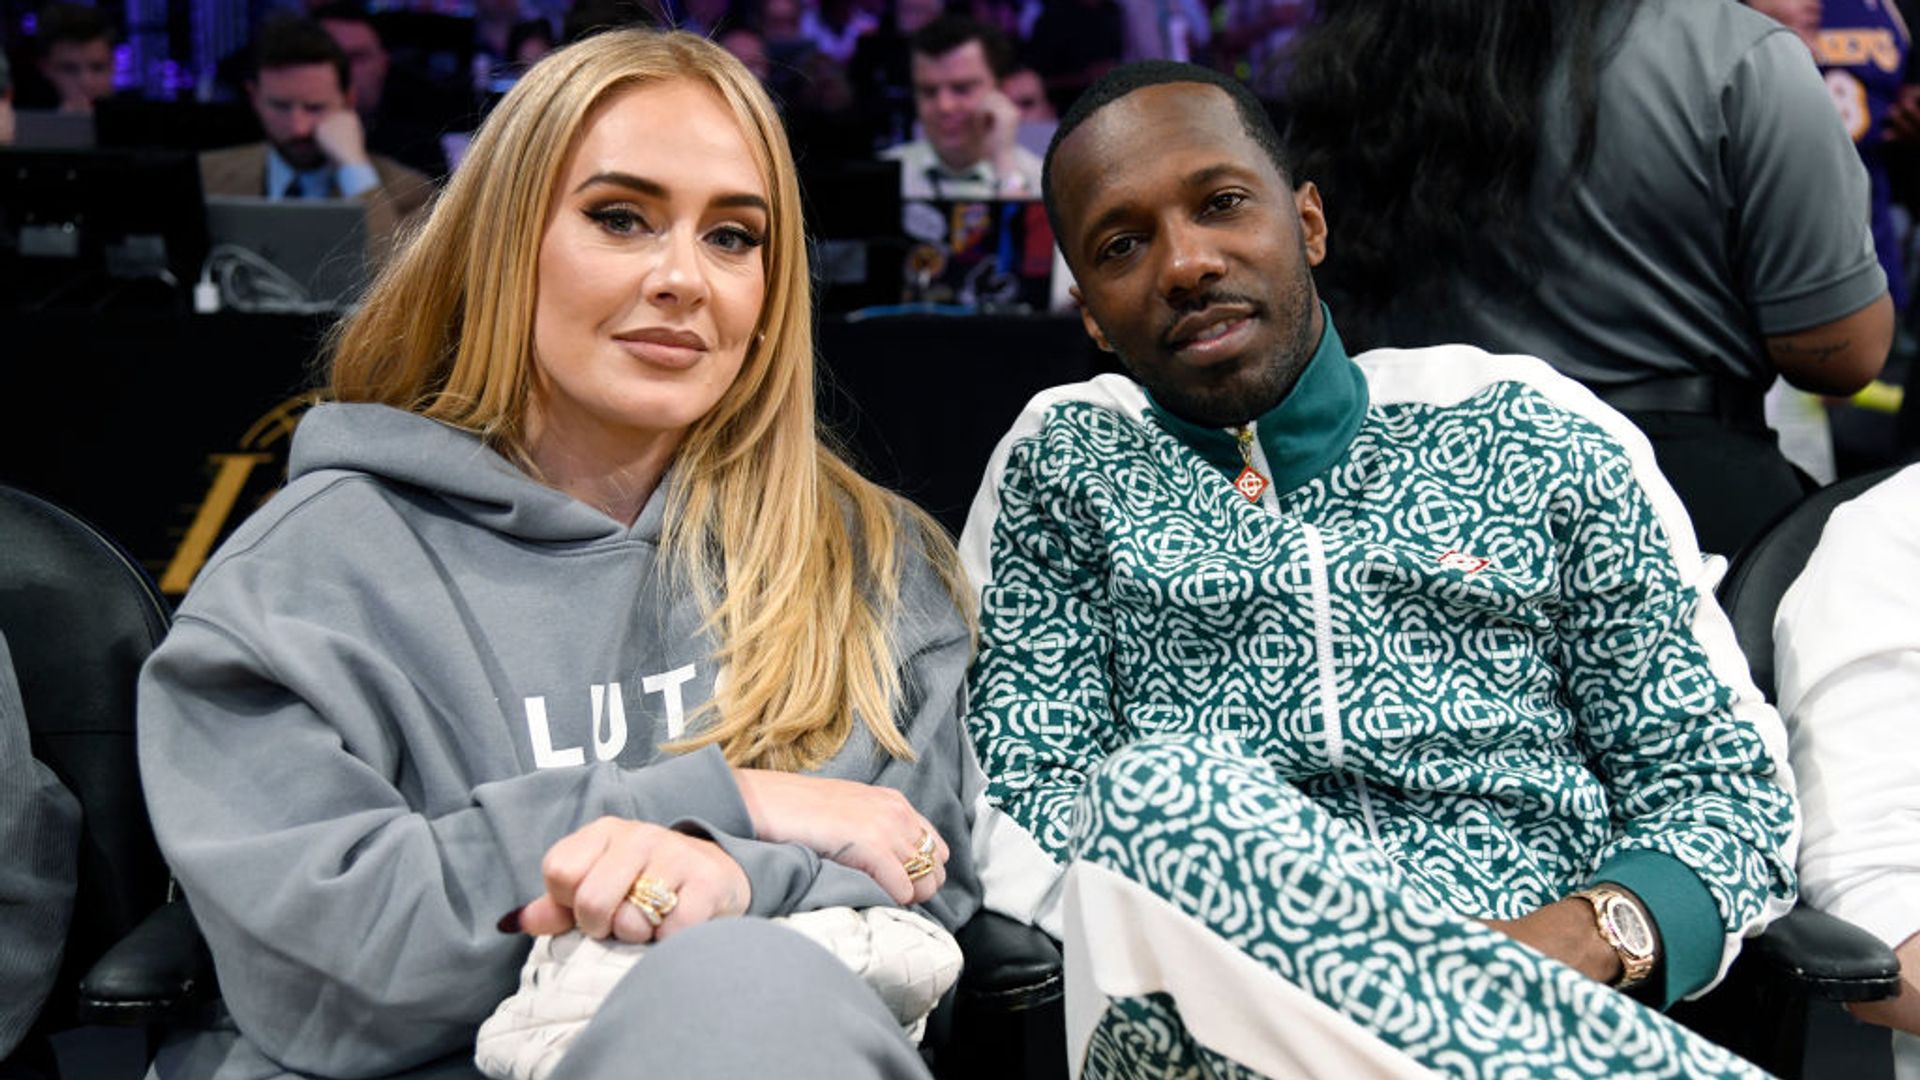 Adele and Rich Paul at the Los Angeles Lakers vs Memphis Grizzlies basketball game in LA